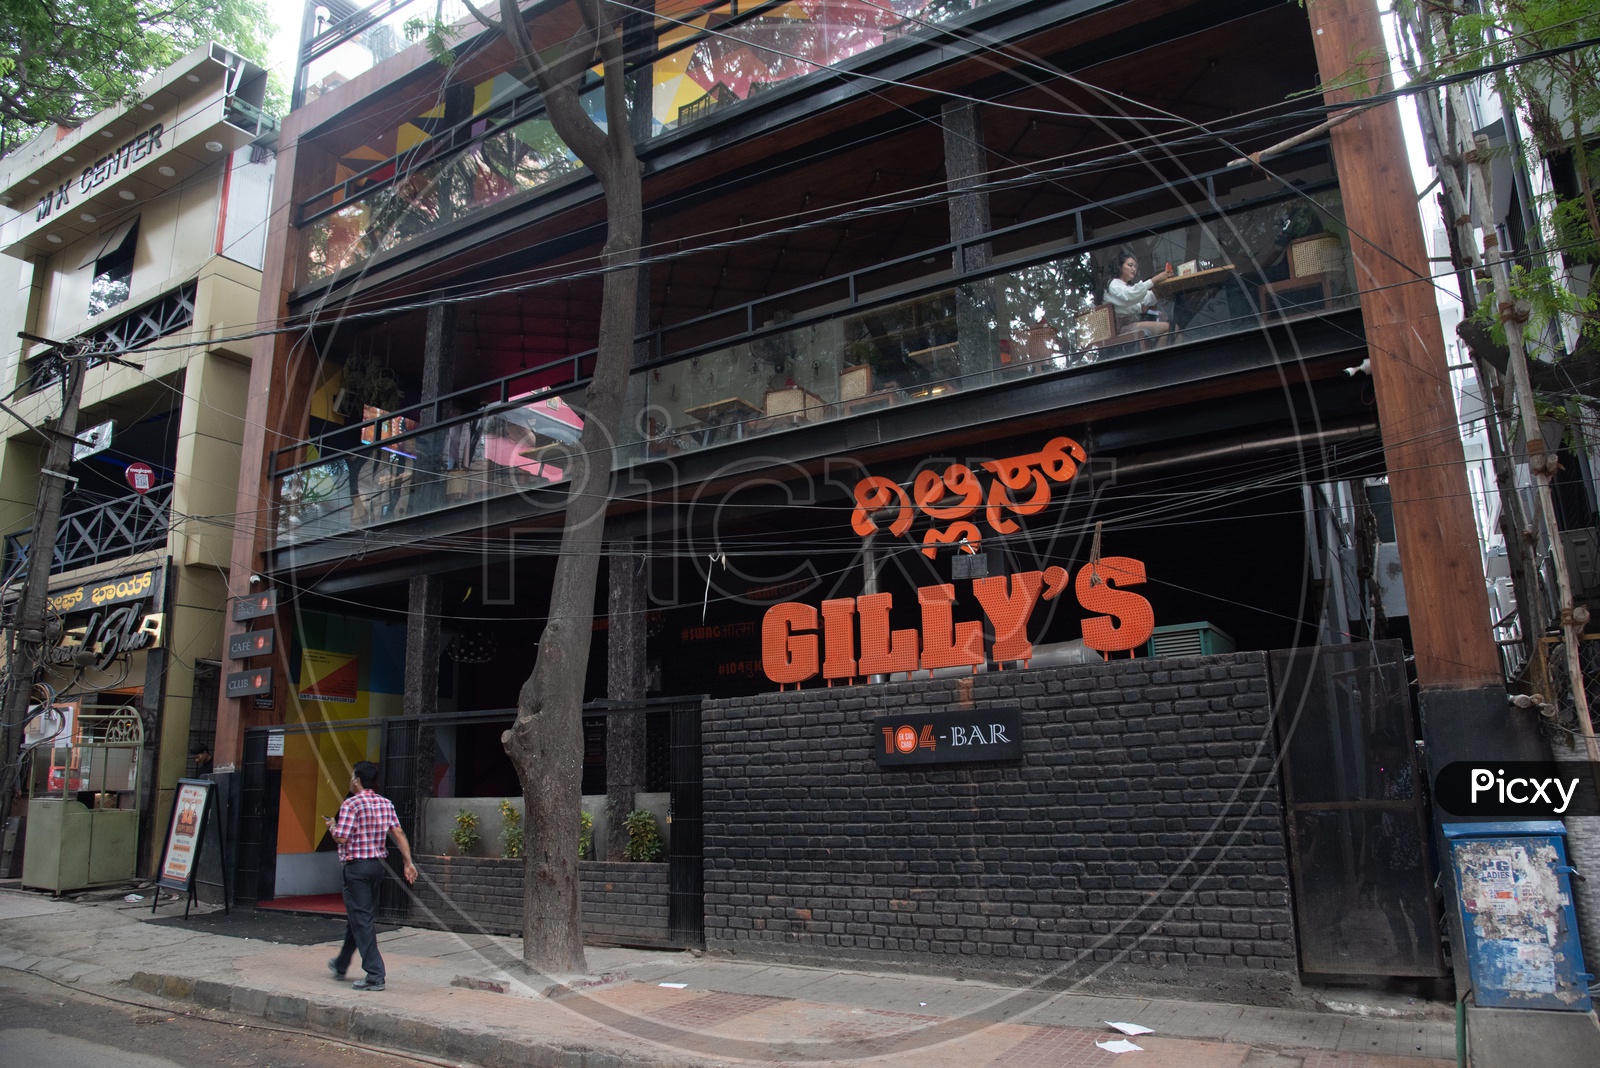 Gilly's 104 Bar and Restaurant